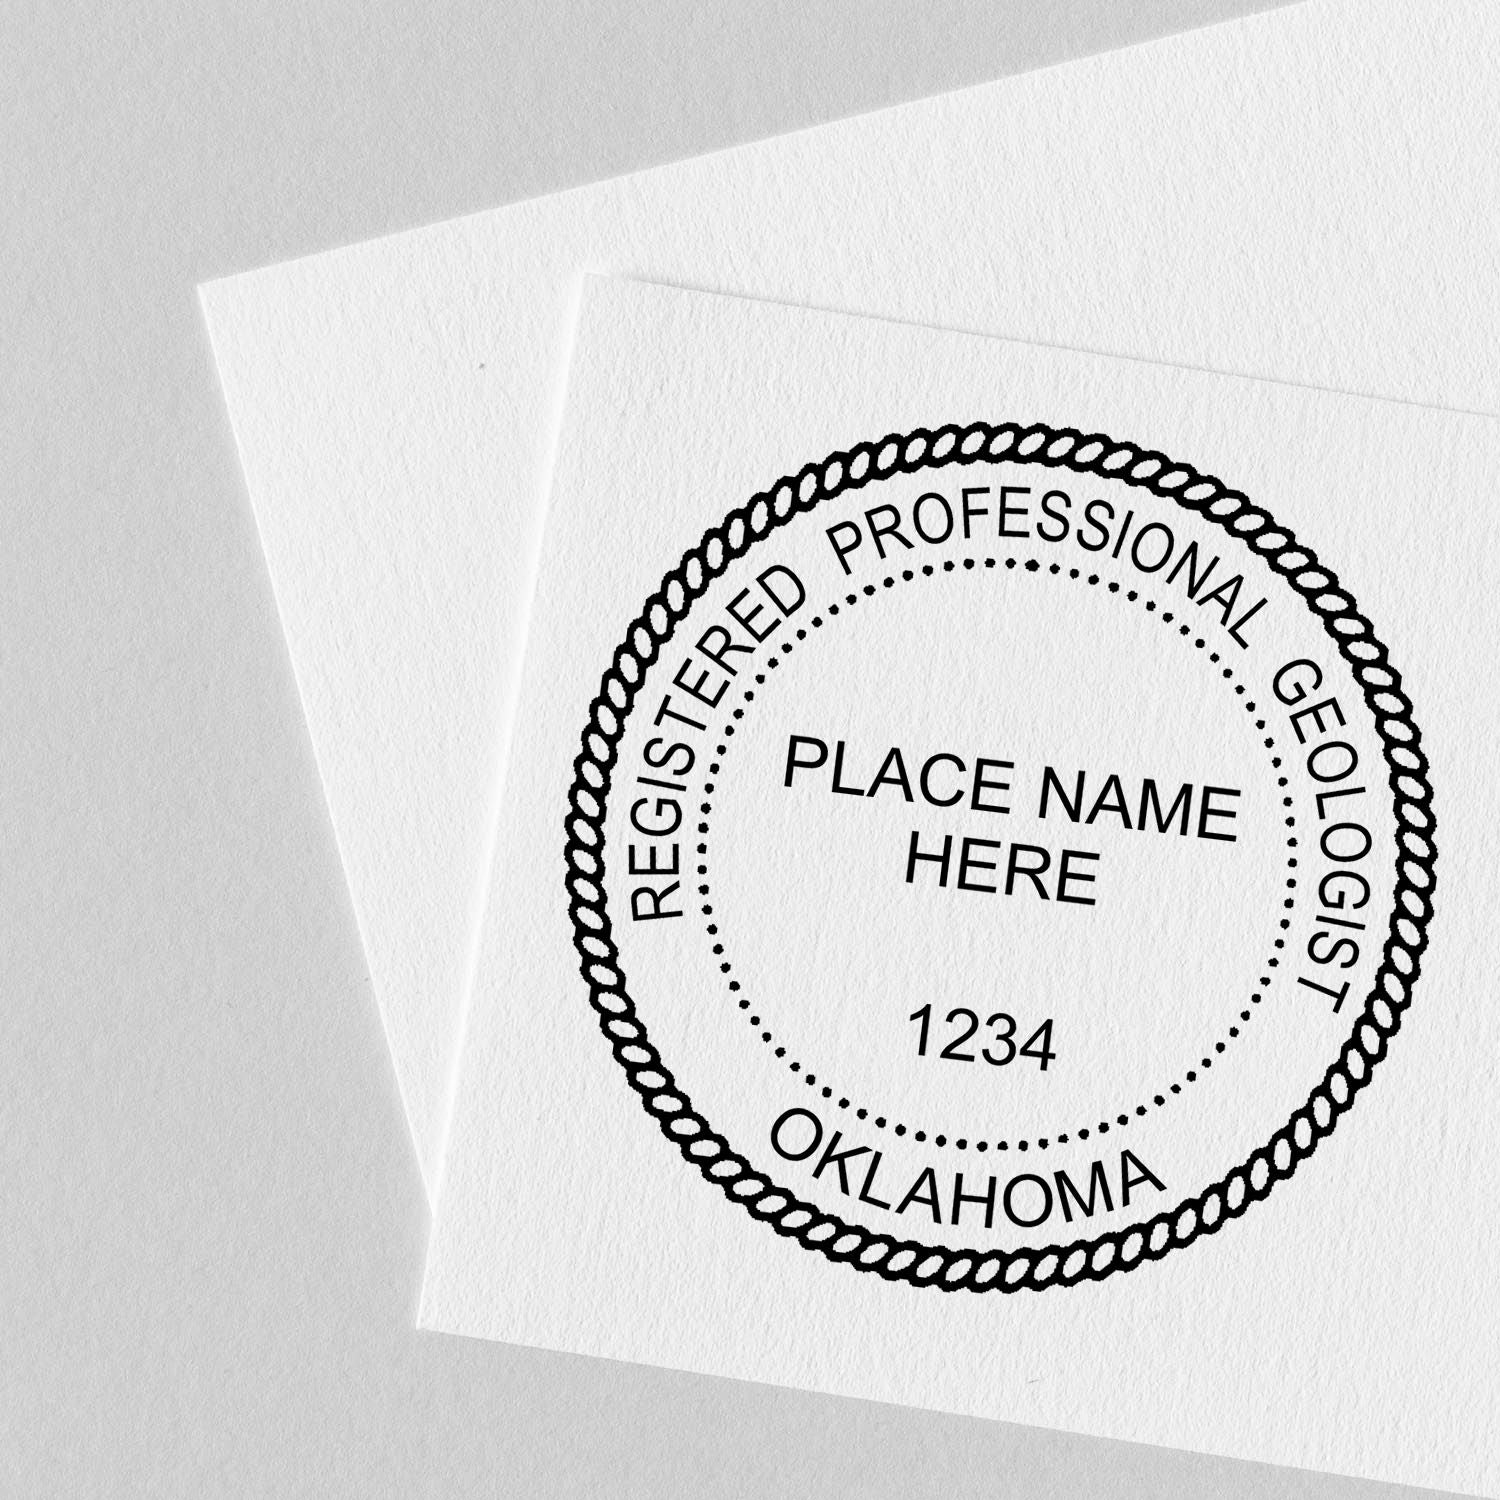 A stamped imprint of the Digital Oklahoma Geologist Stamp, Electronic Seal for Oklahoma Geologist in this stylish lifestyle photo, setting the tone for a unique and personalized product.